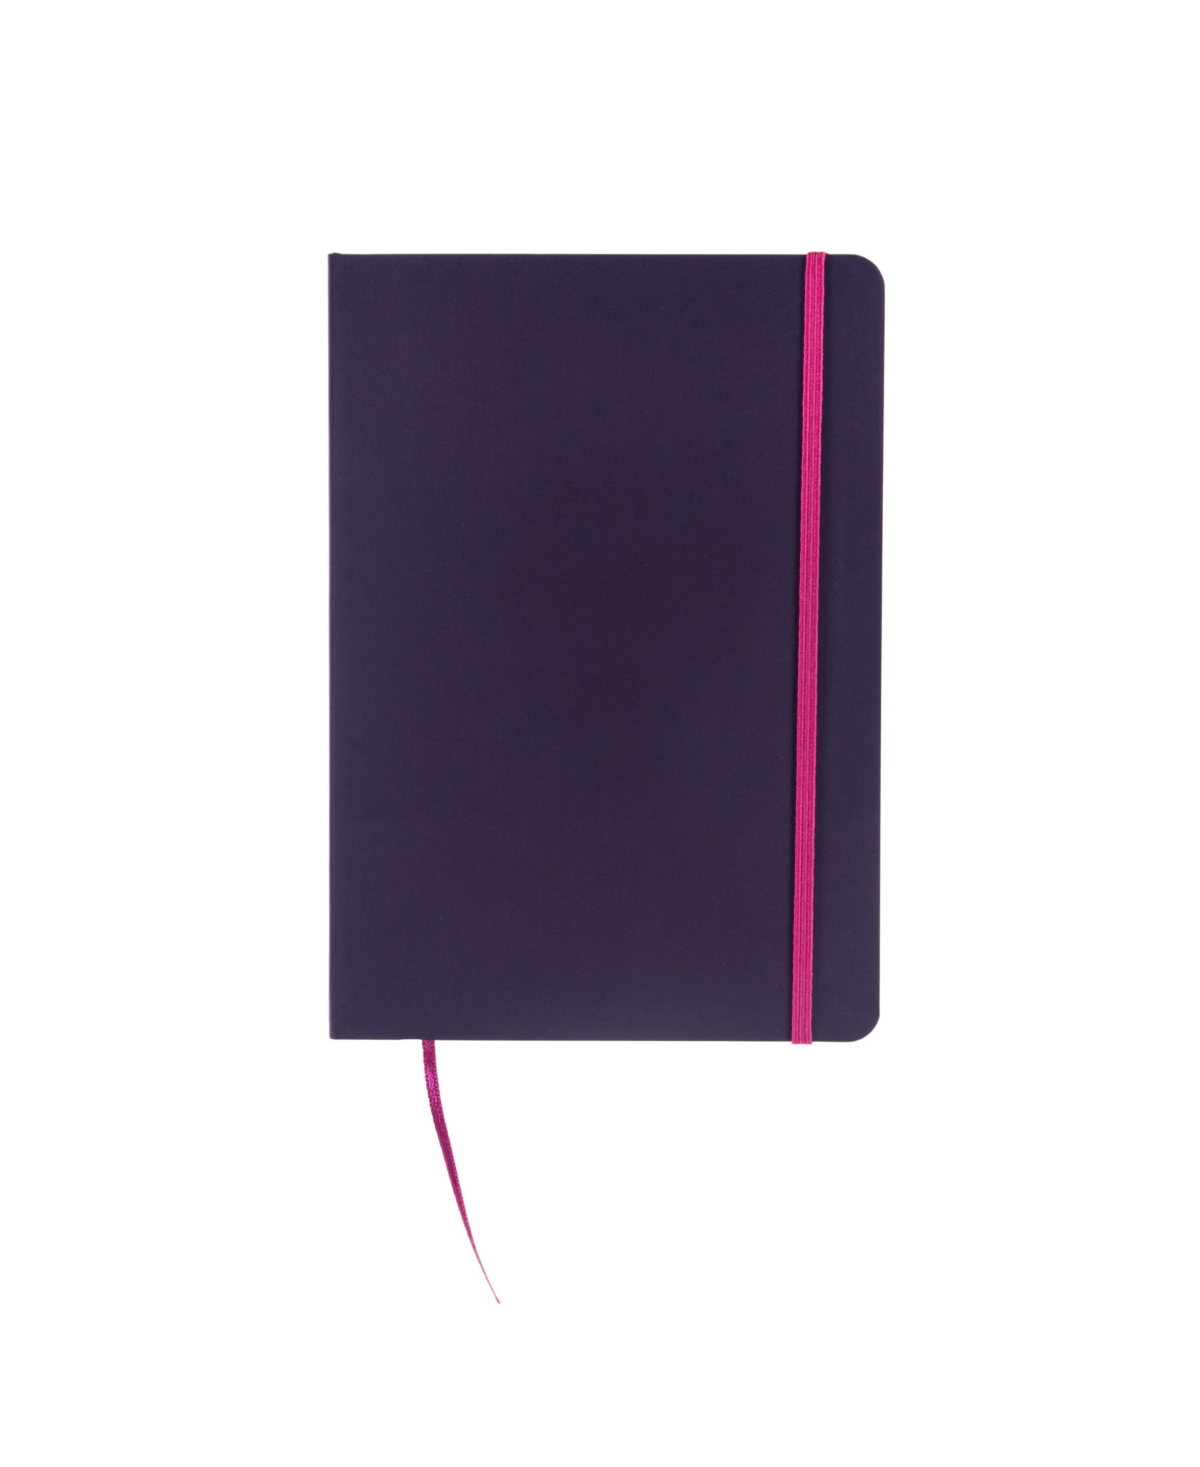 Ispira Soft Cover Dotted A5 Notebook, 5.8" x 8.3" - Purple